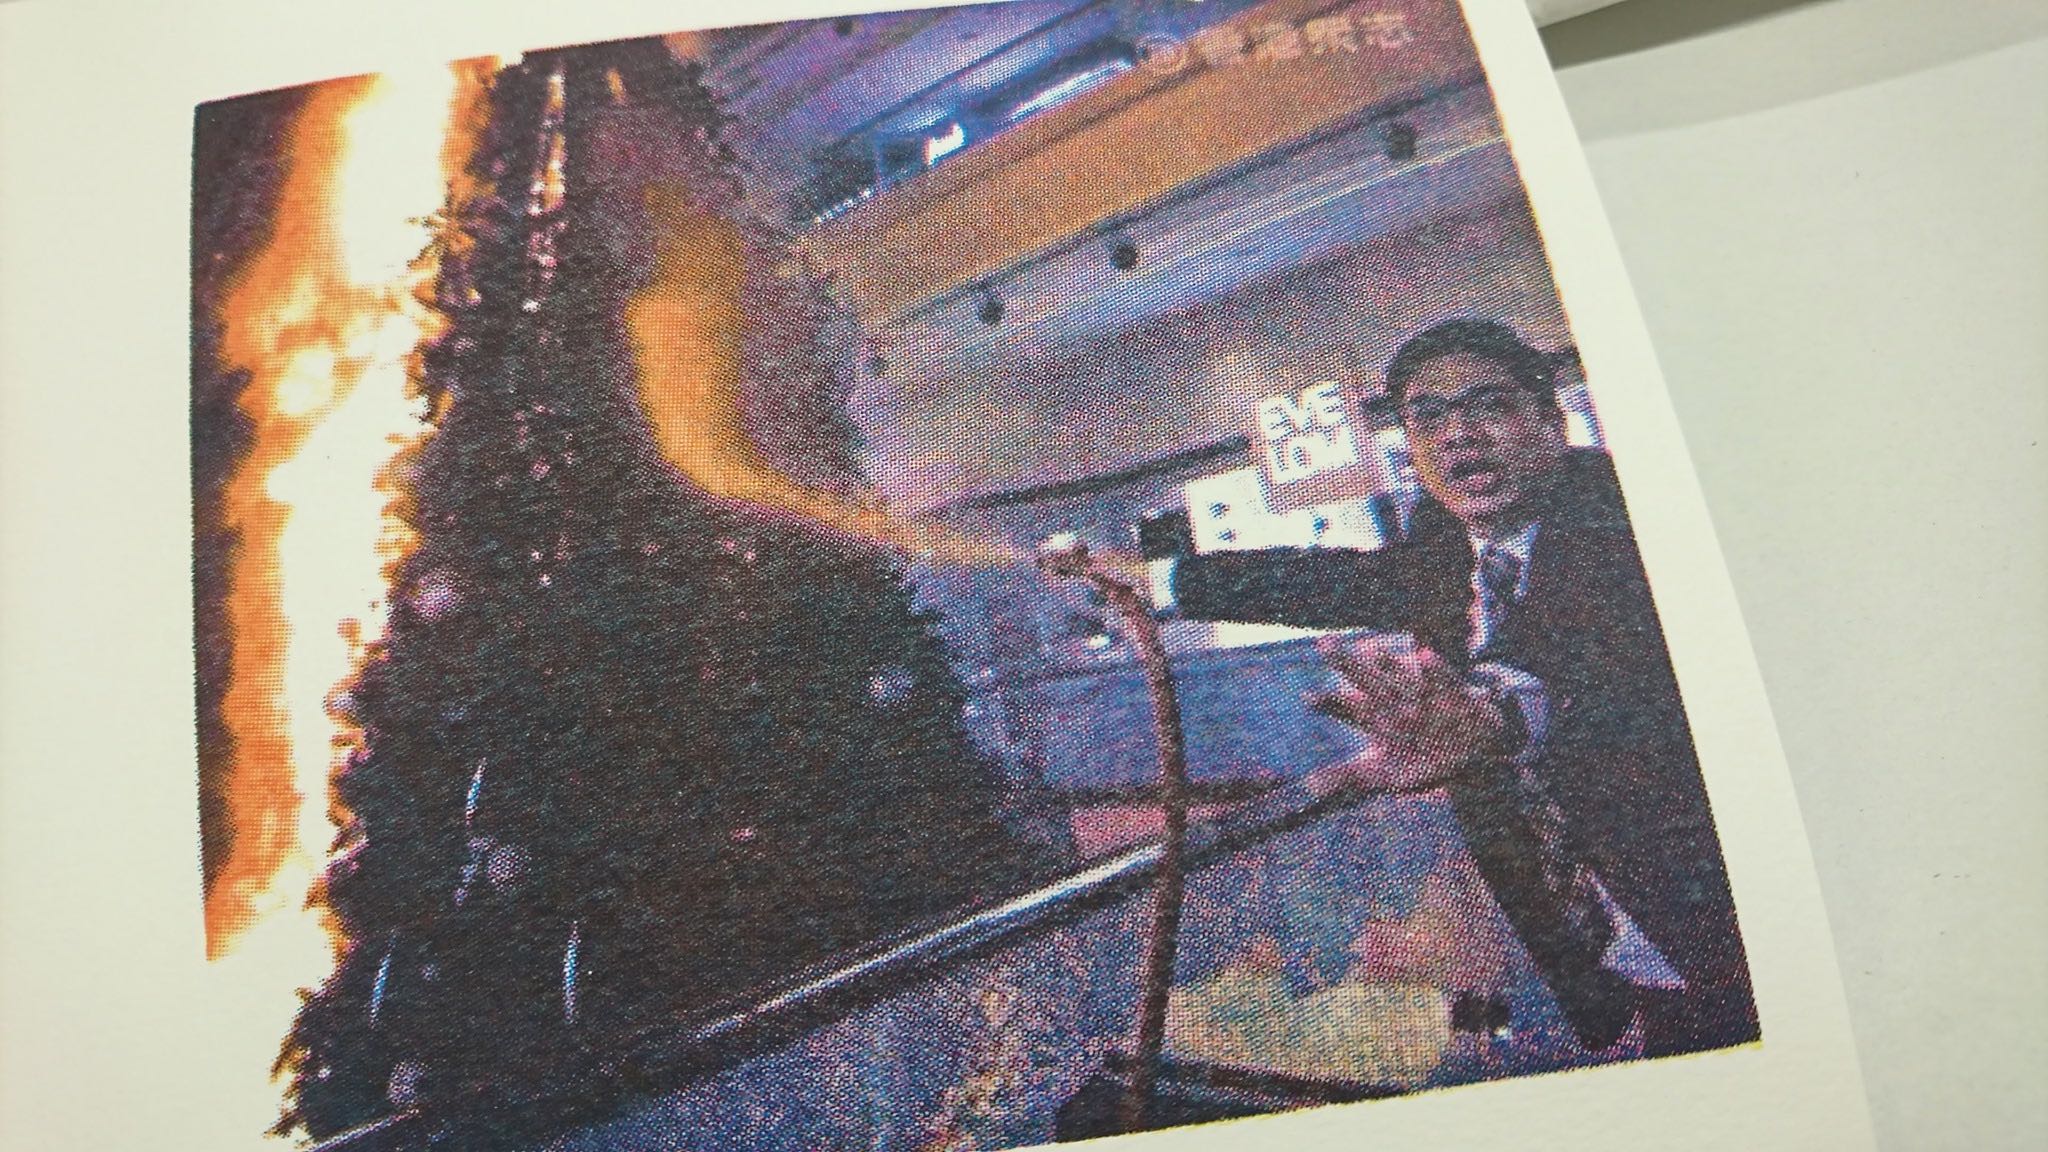 A limited edition Christmas card depicting a mall employee trying to extinguish a flaming Christmas tree last month. Photo via Facebook.